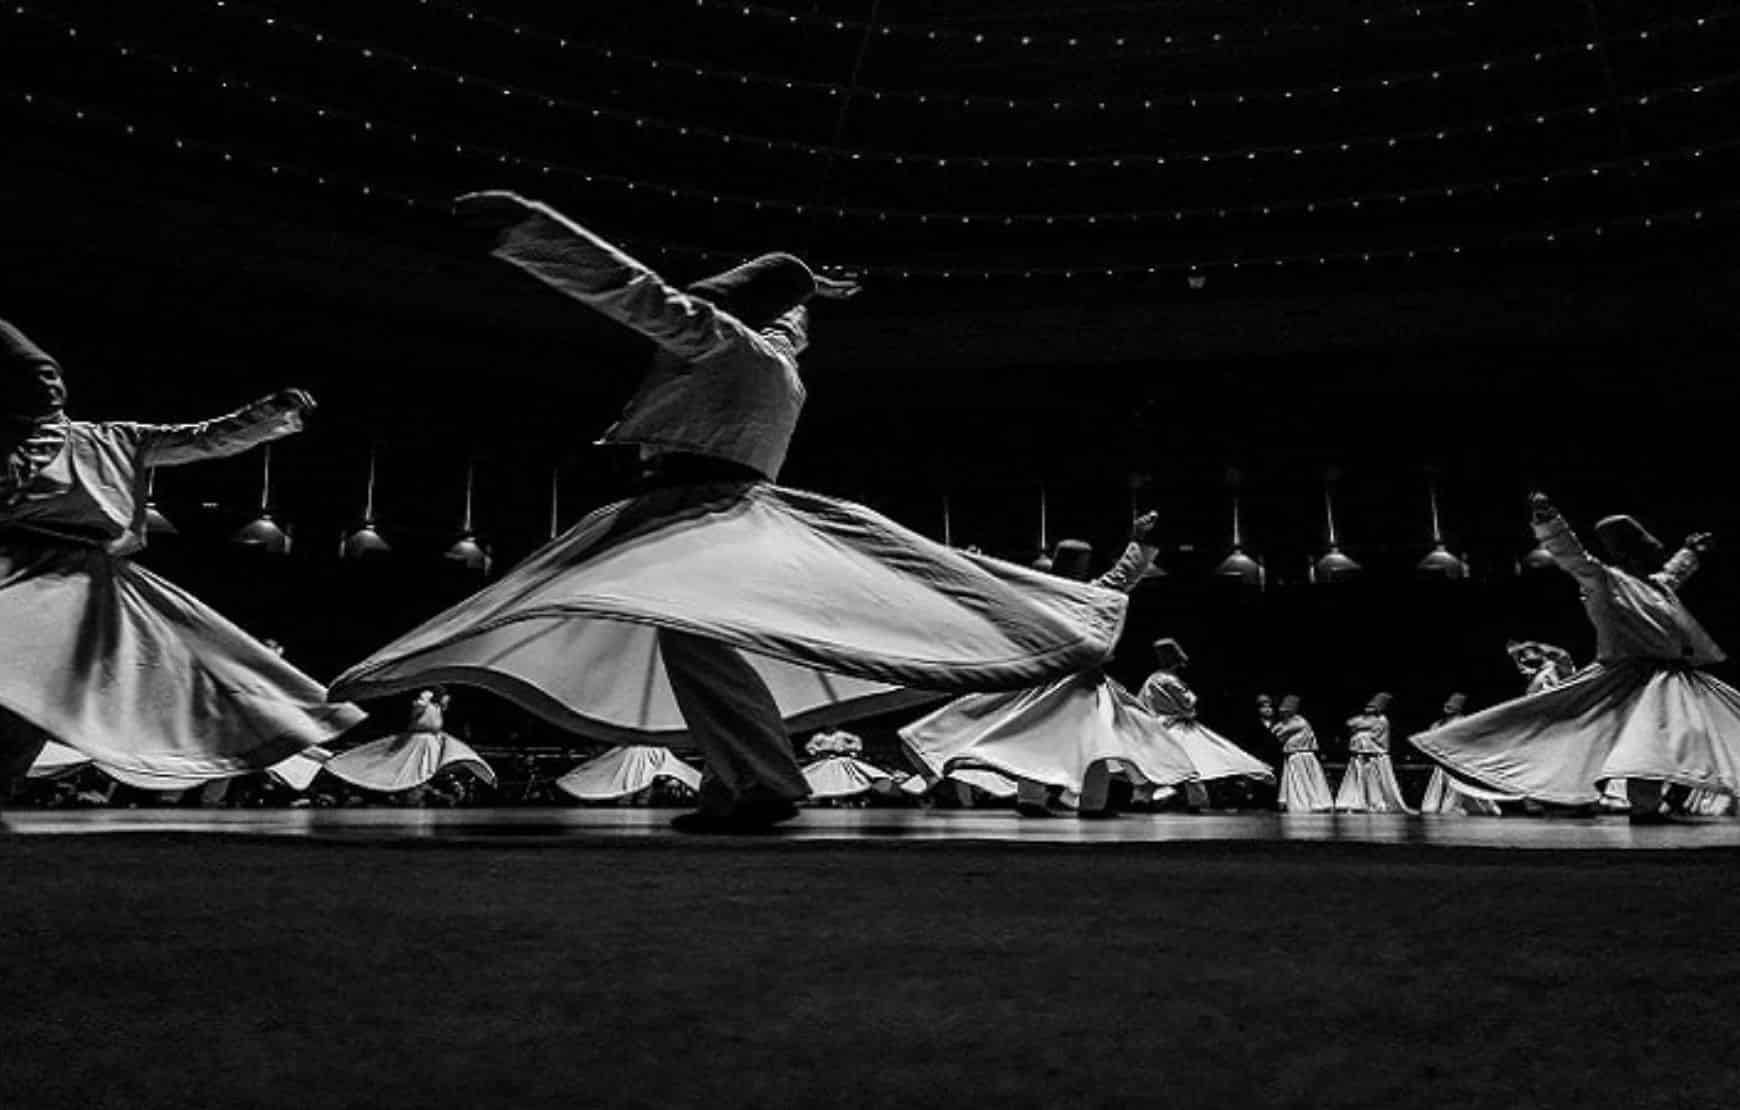 Dervish ceremony in cappadocia - whirling dervishes black and white